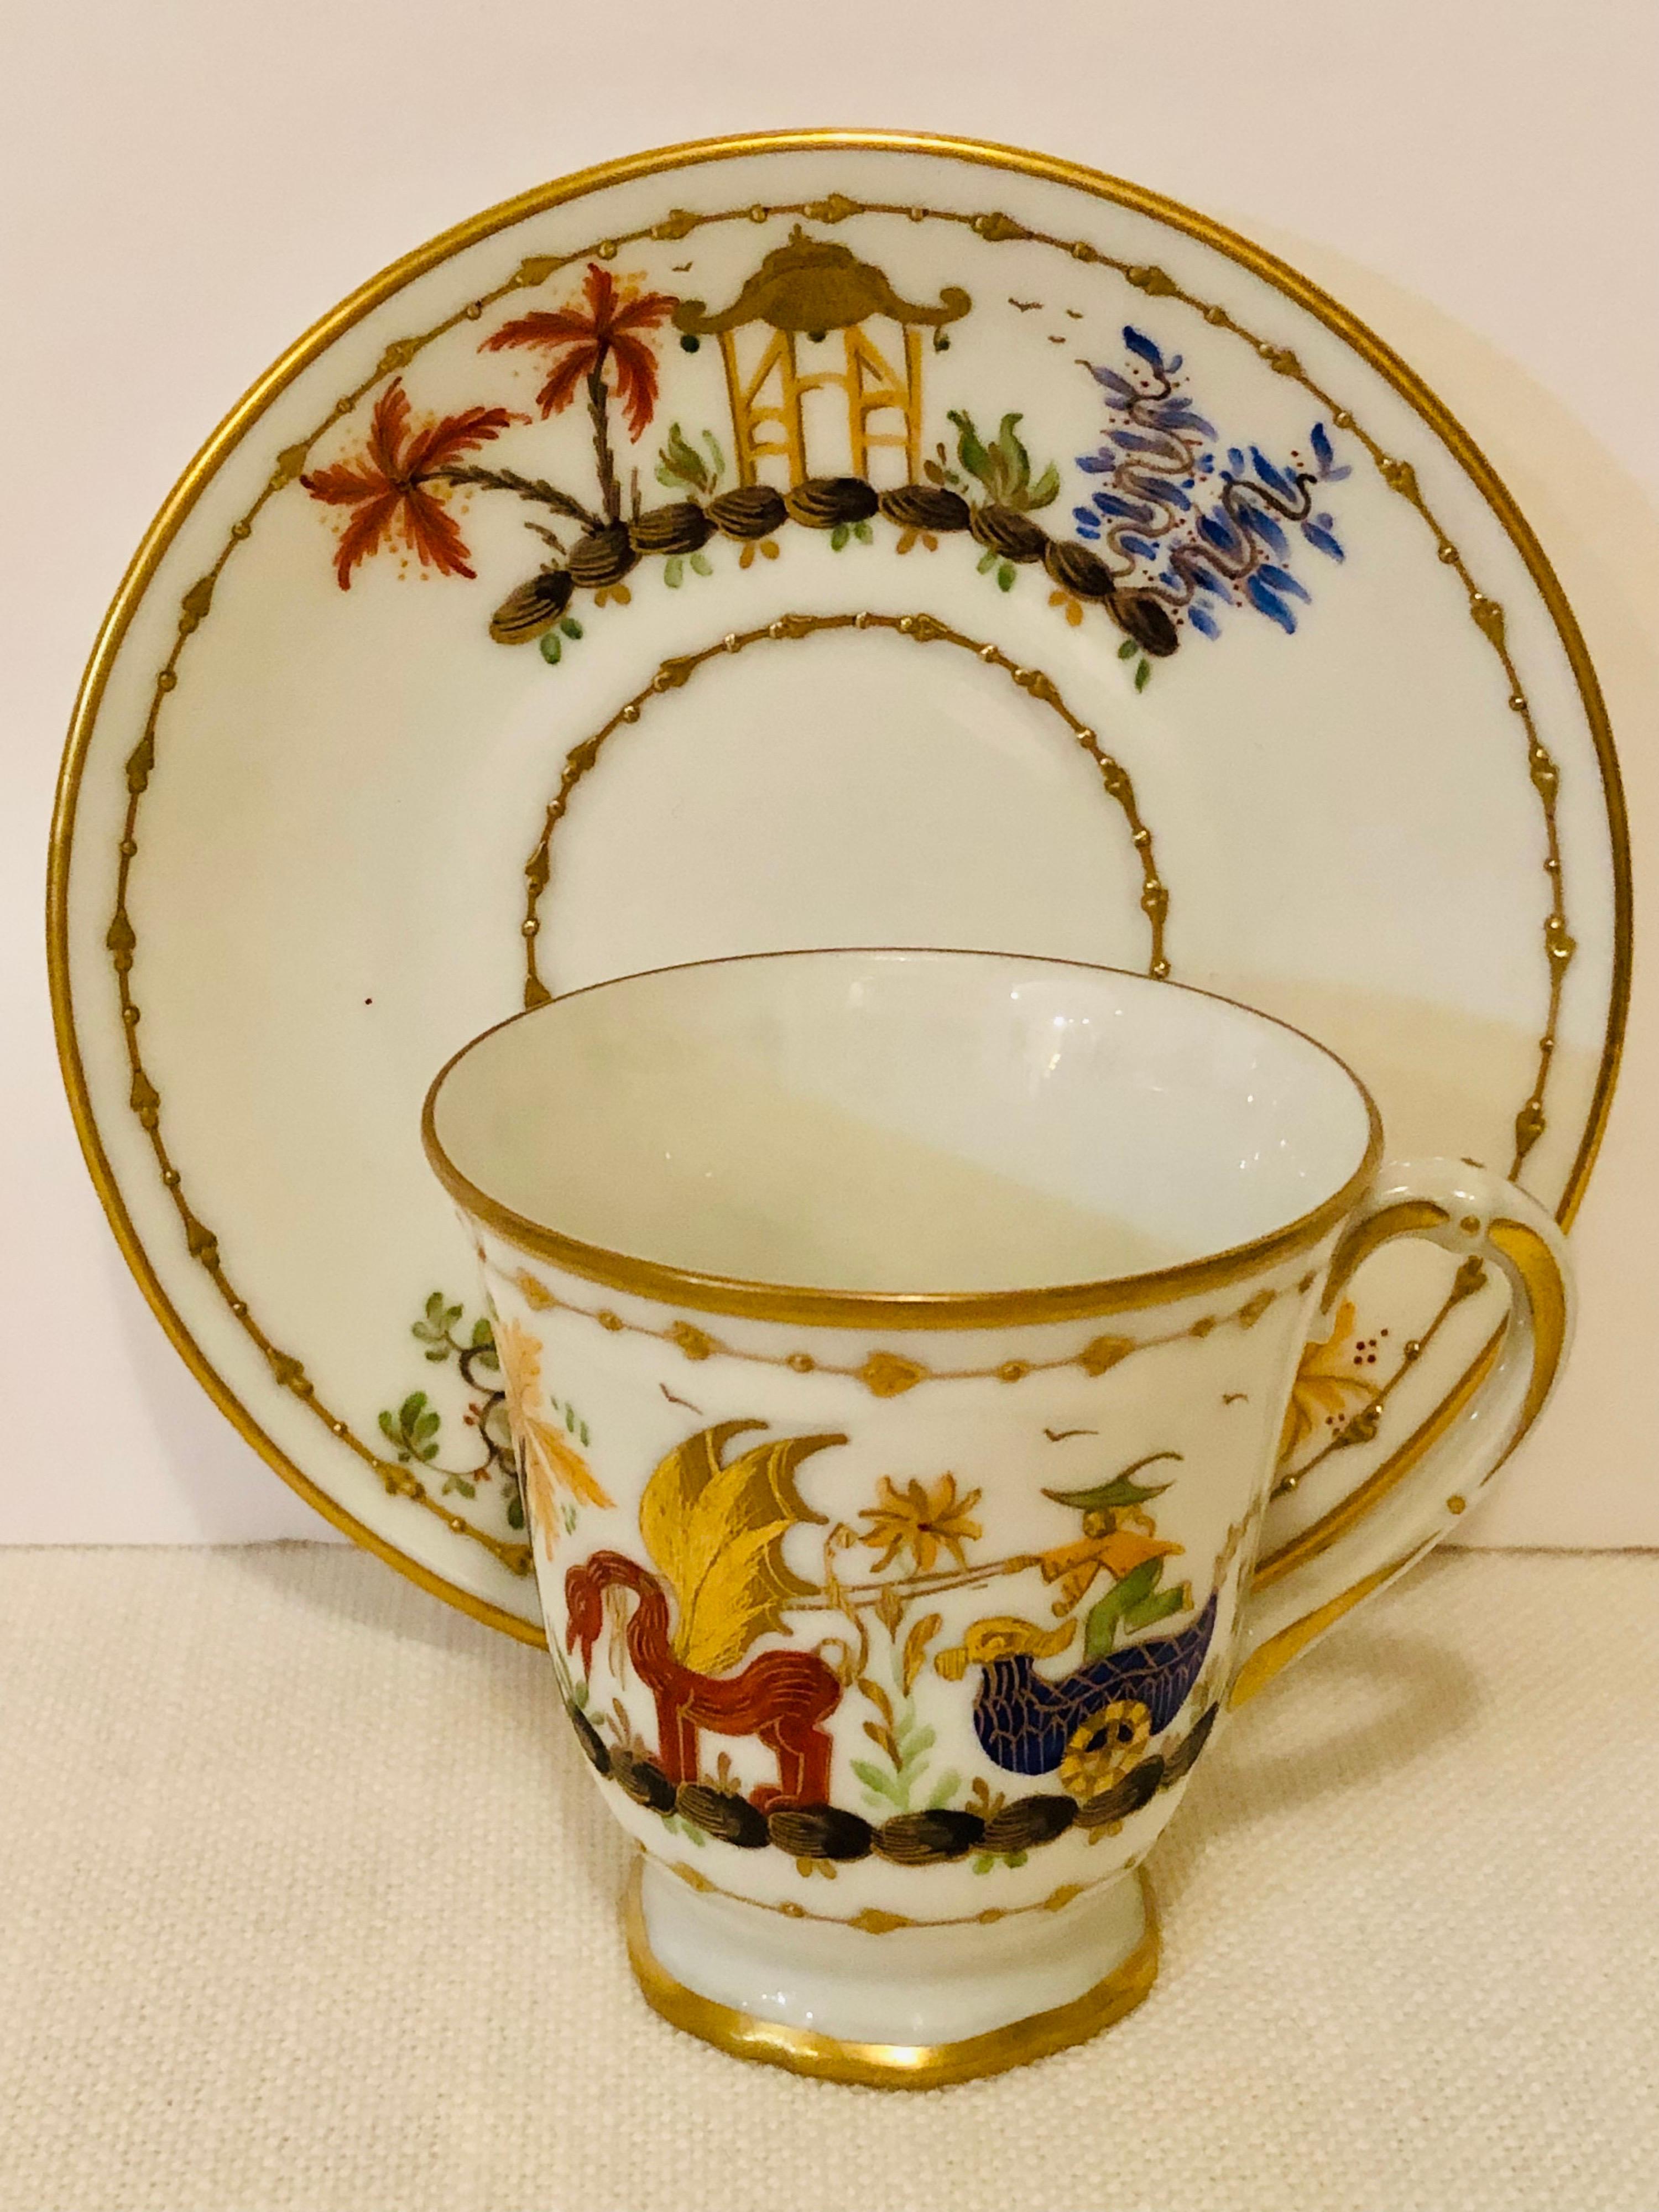 Le Tallec Demitasse Cup and Saucer in the Cirque Chinois Pattern 2